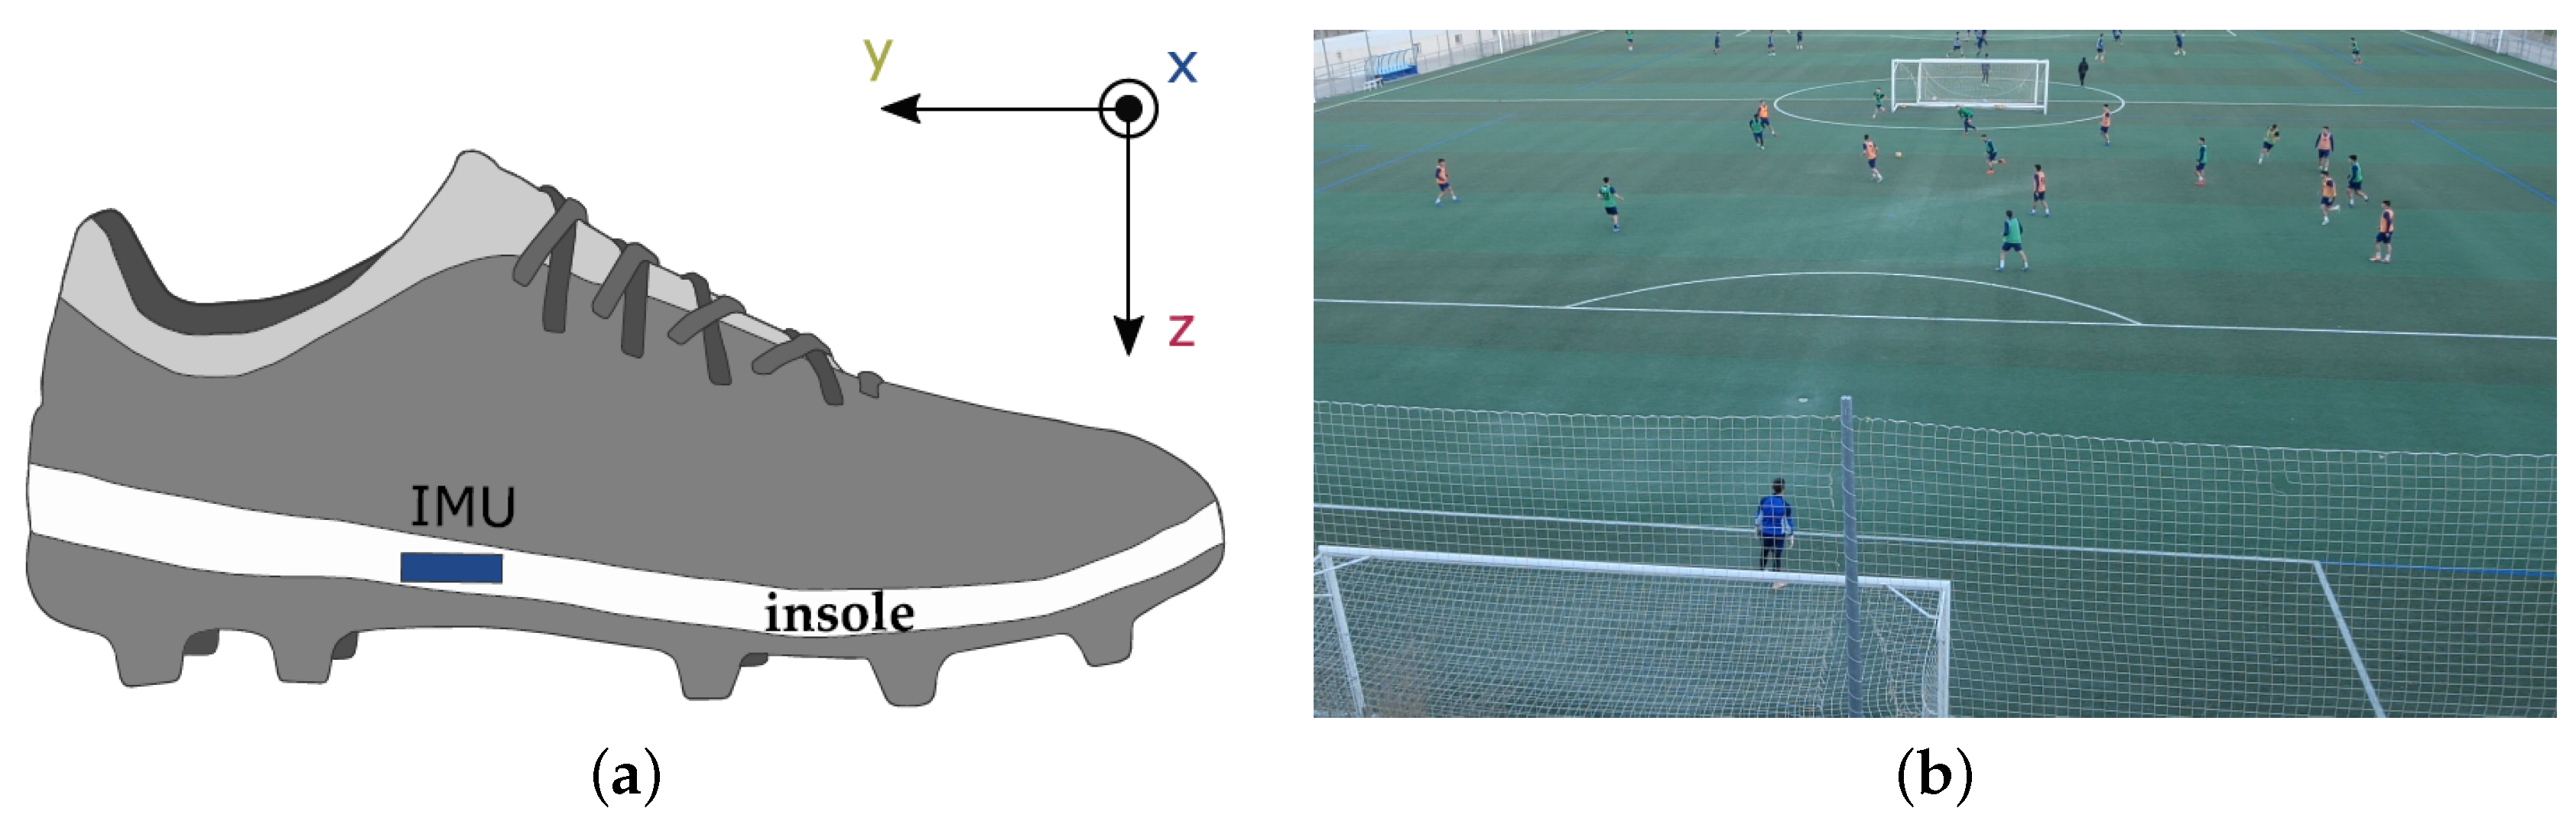 Wearable Soccer (Football) Sensors That Track Shots, Passes And